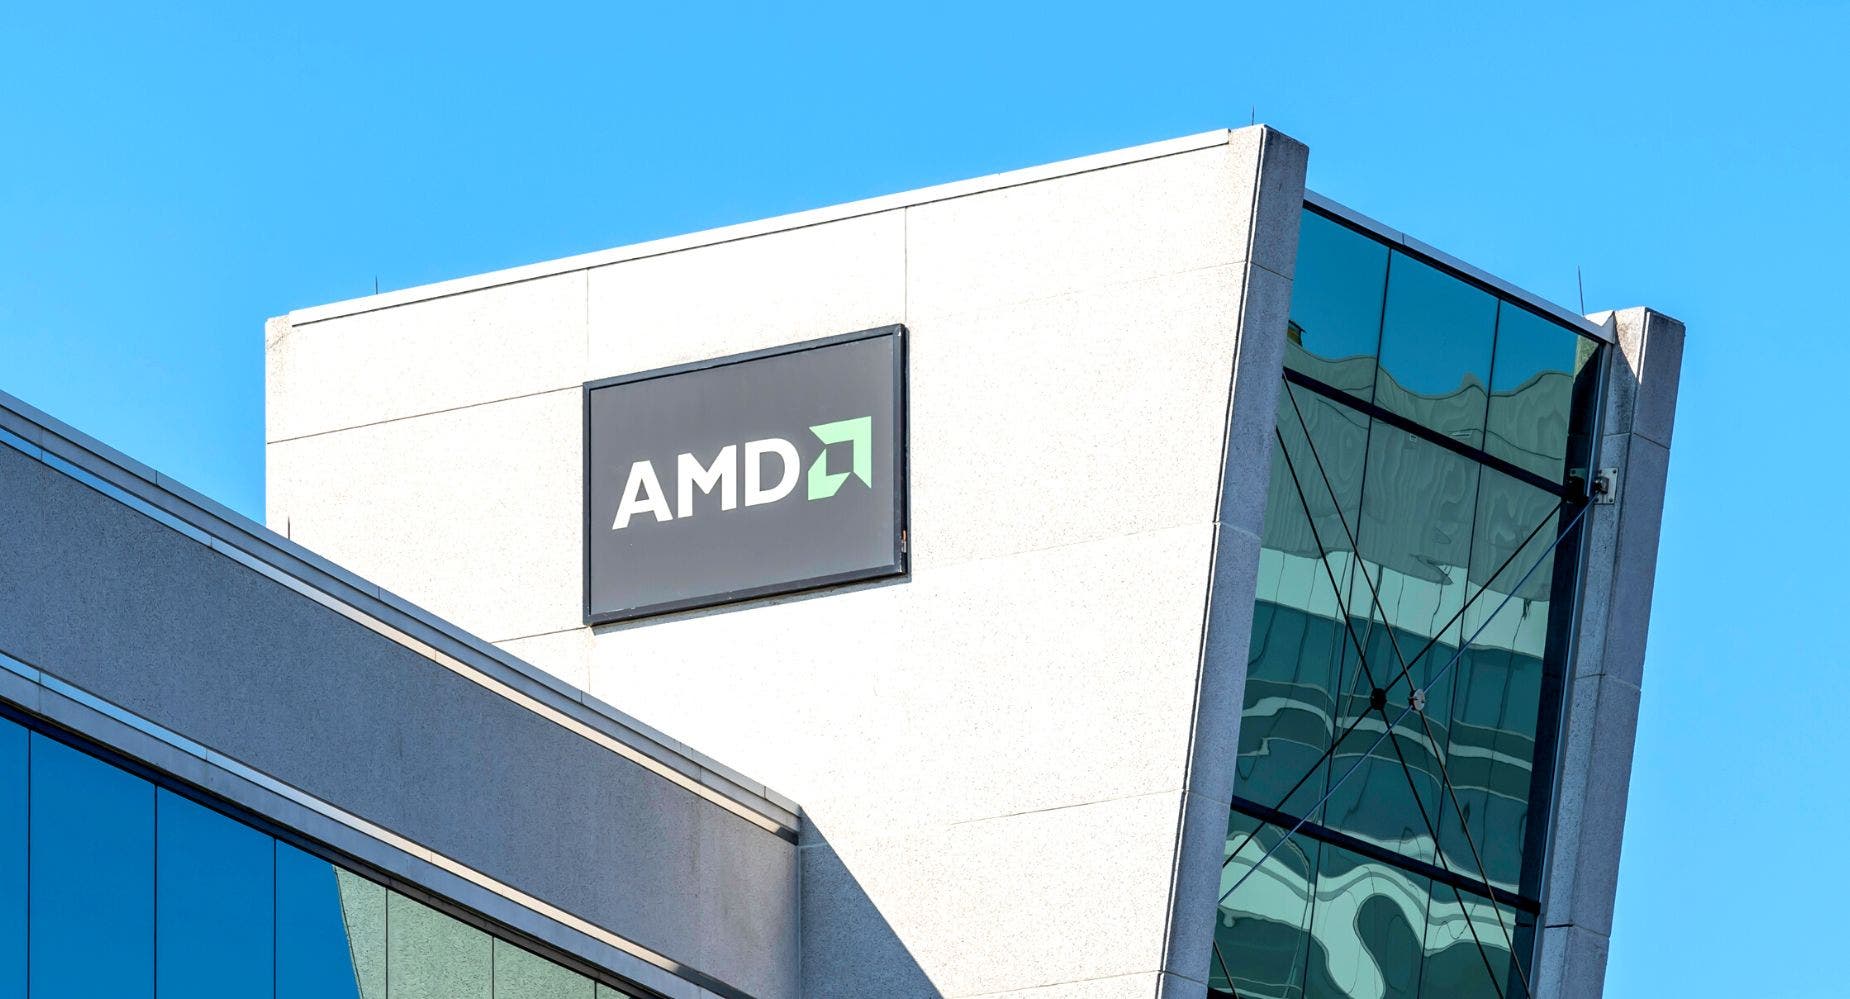 6 Advanced Micro Devices Analysts On Q4 Results: 'Relief To Investors'